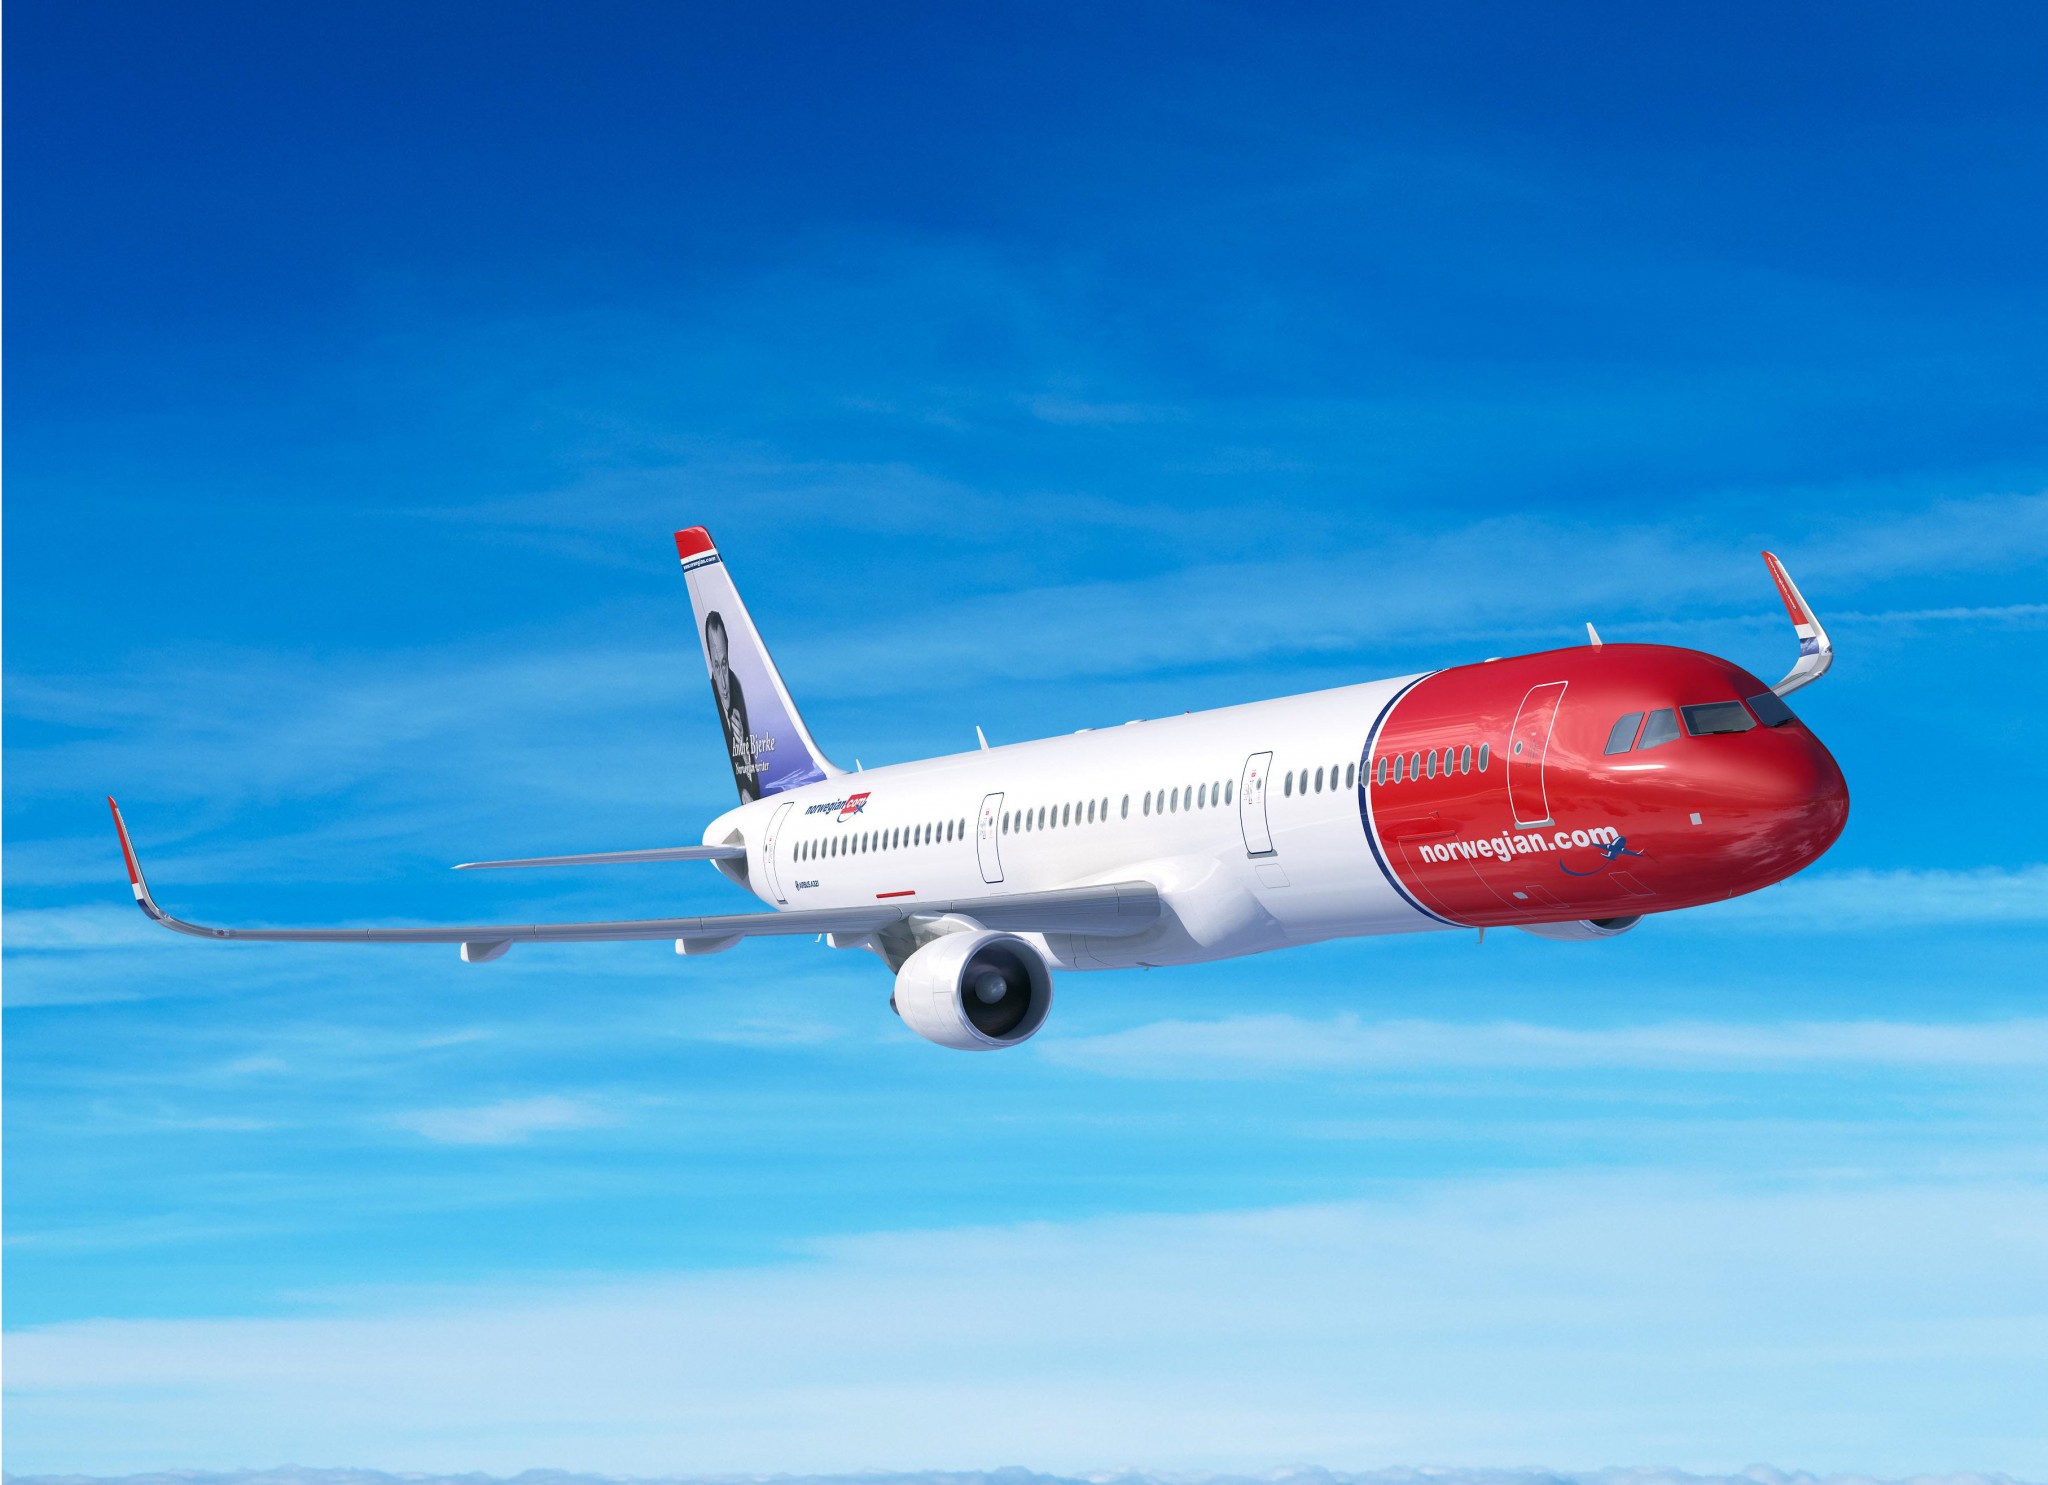 Norwegian faces delayed delivery of its first 737 Max